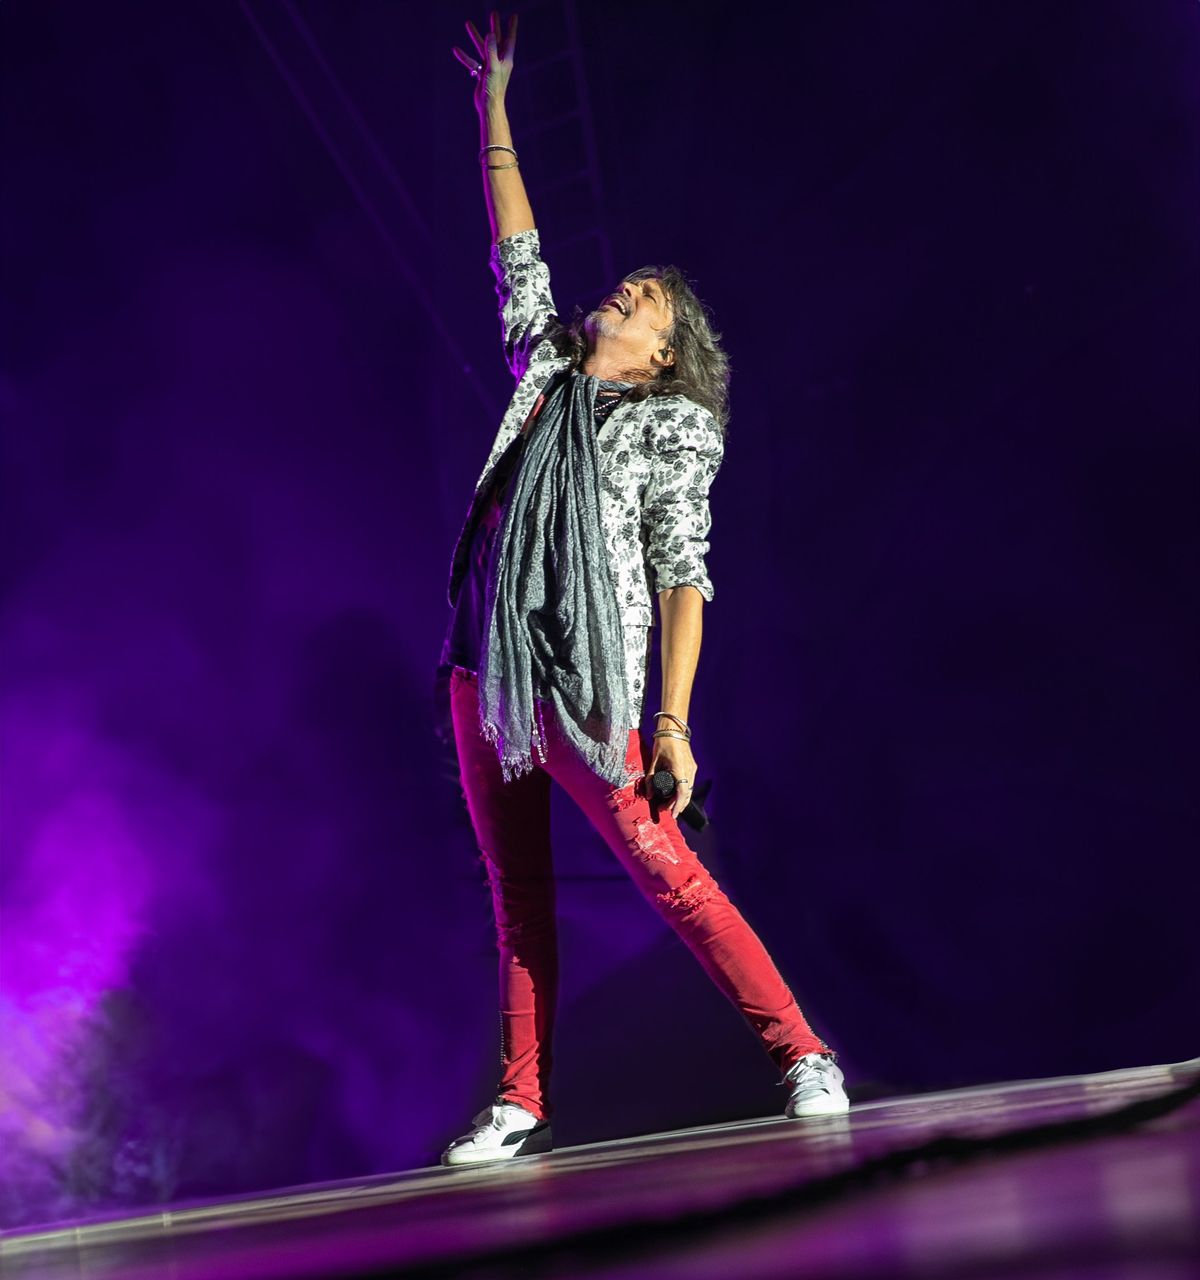 After 20 years of fronting Foreigner, Kelly Hansen is ready for new adventures. This Foreigner tour is being billed as the long-running band’s last.  (Krista Abruzzini)